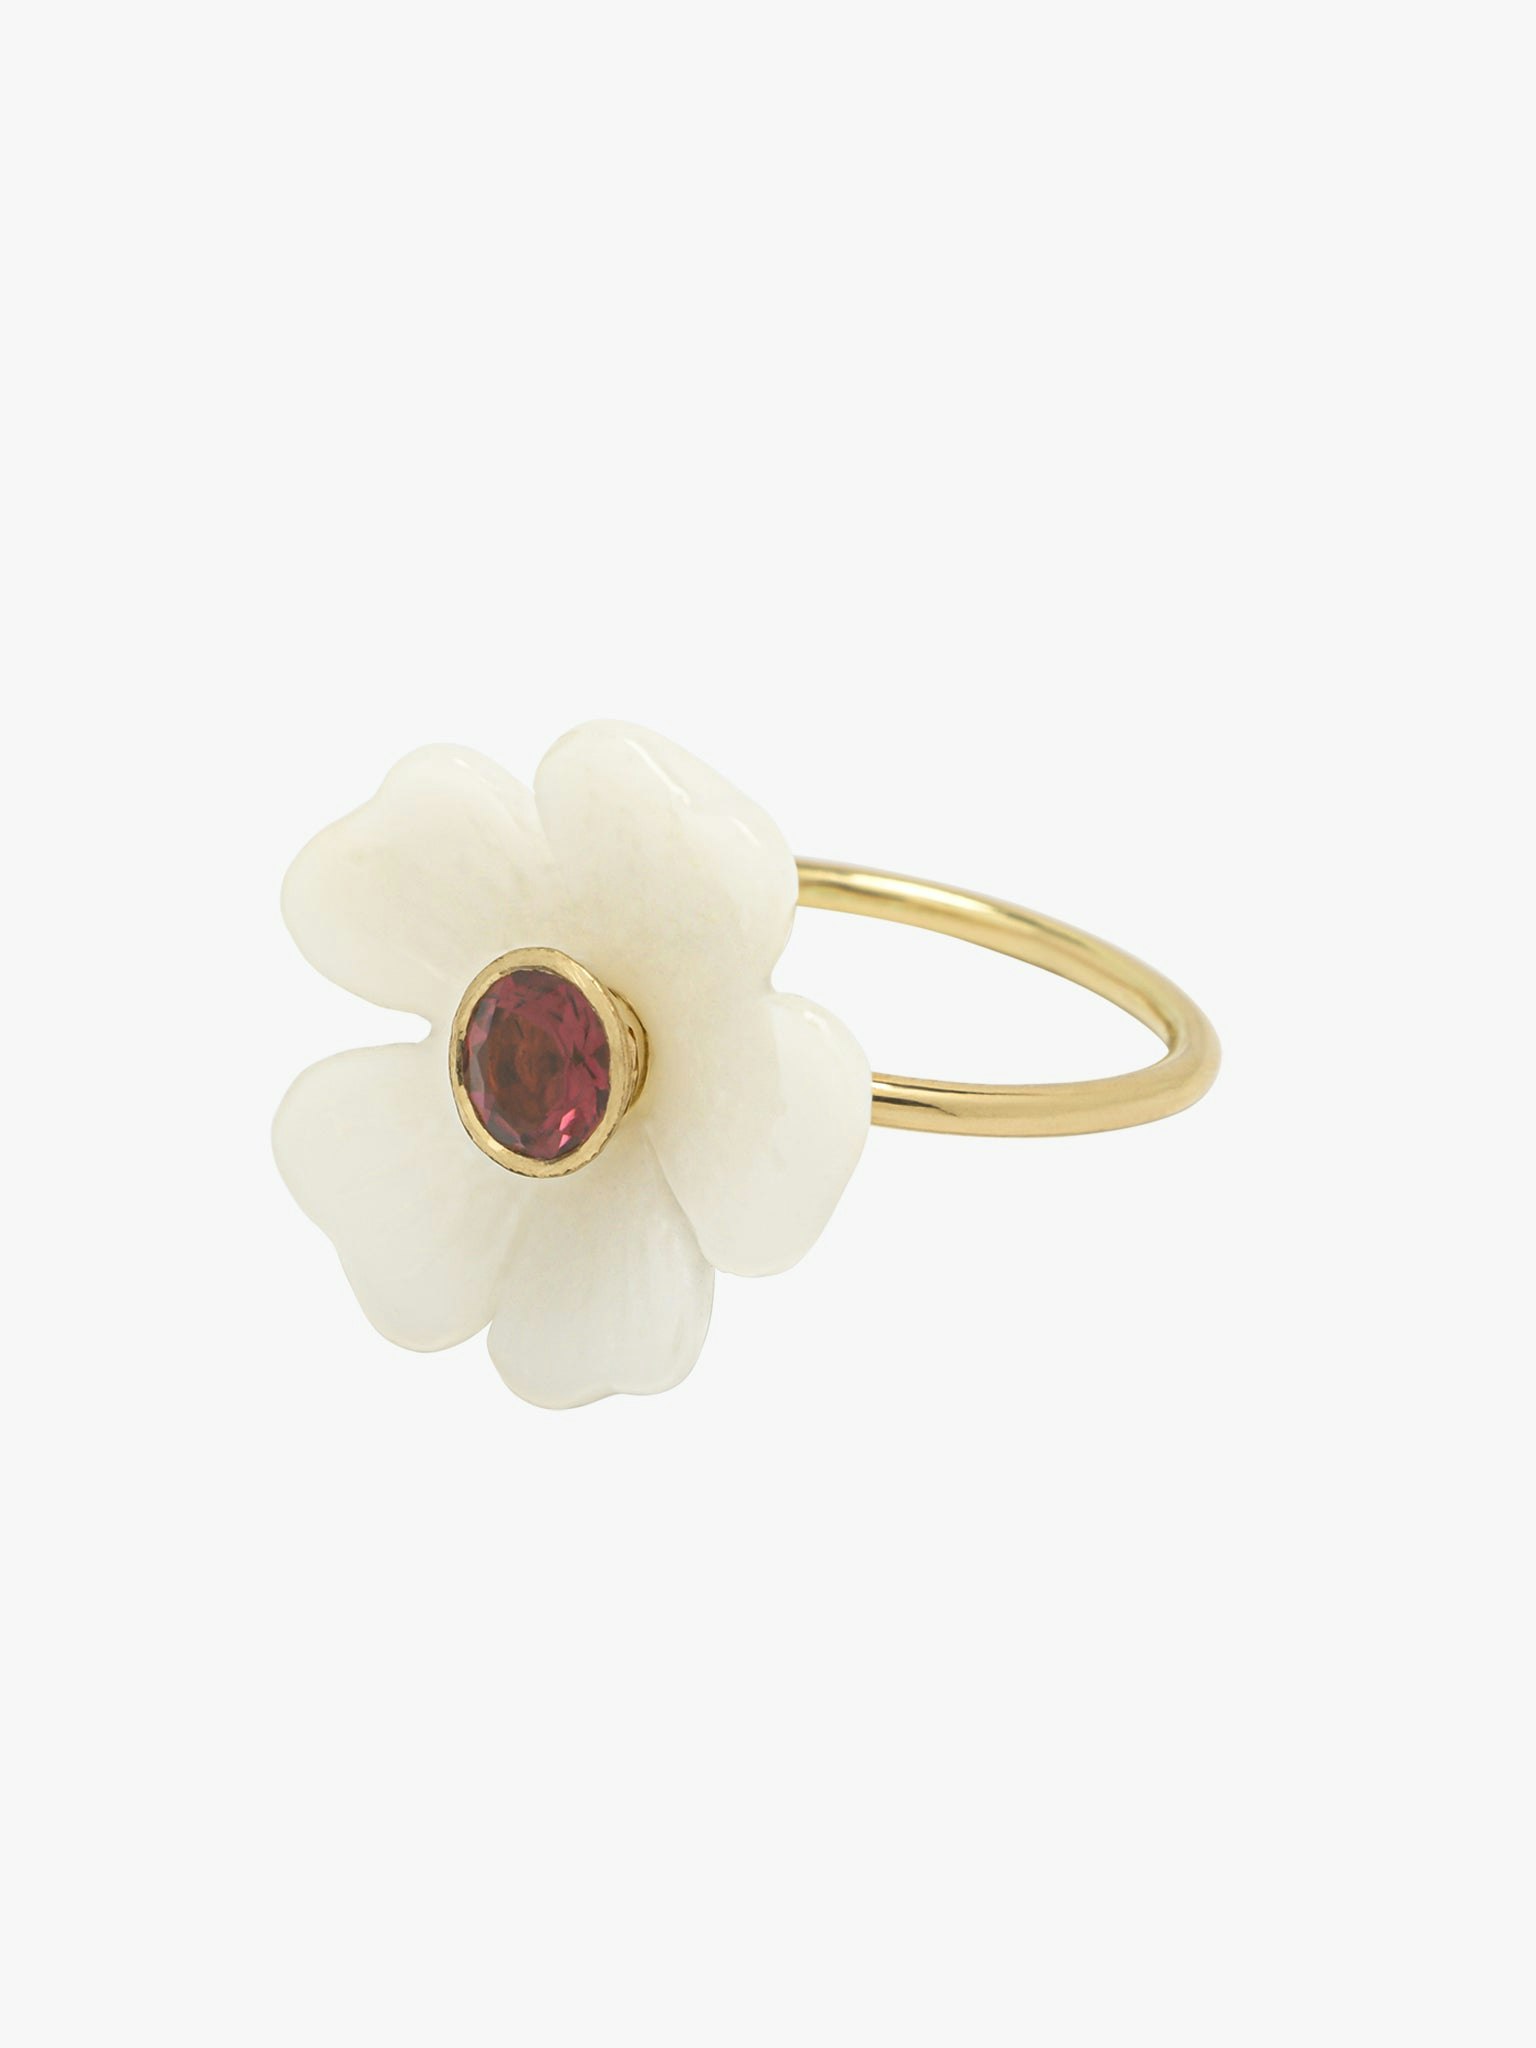 Opal and pink tourmaline small flower ring photo 1